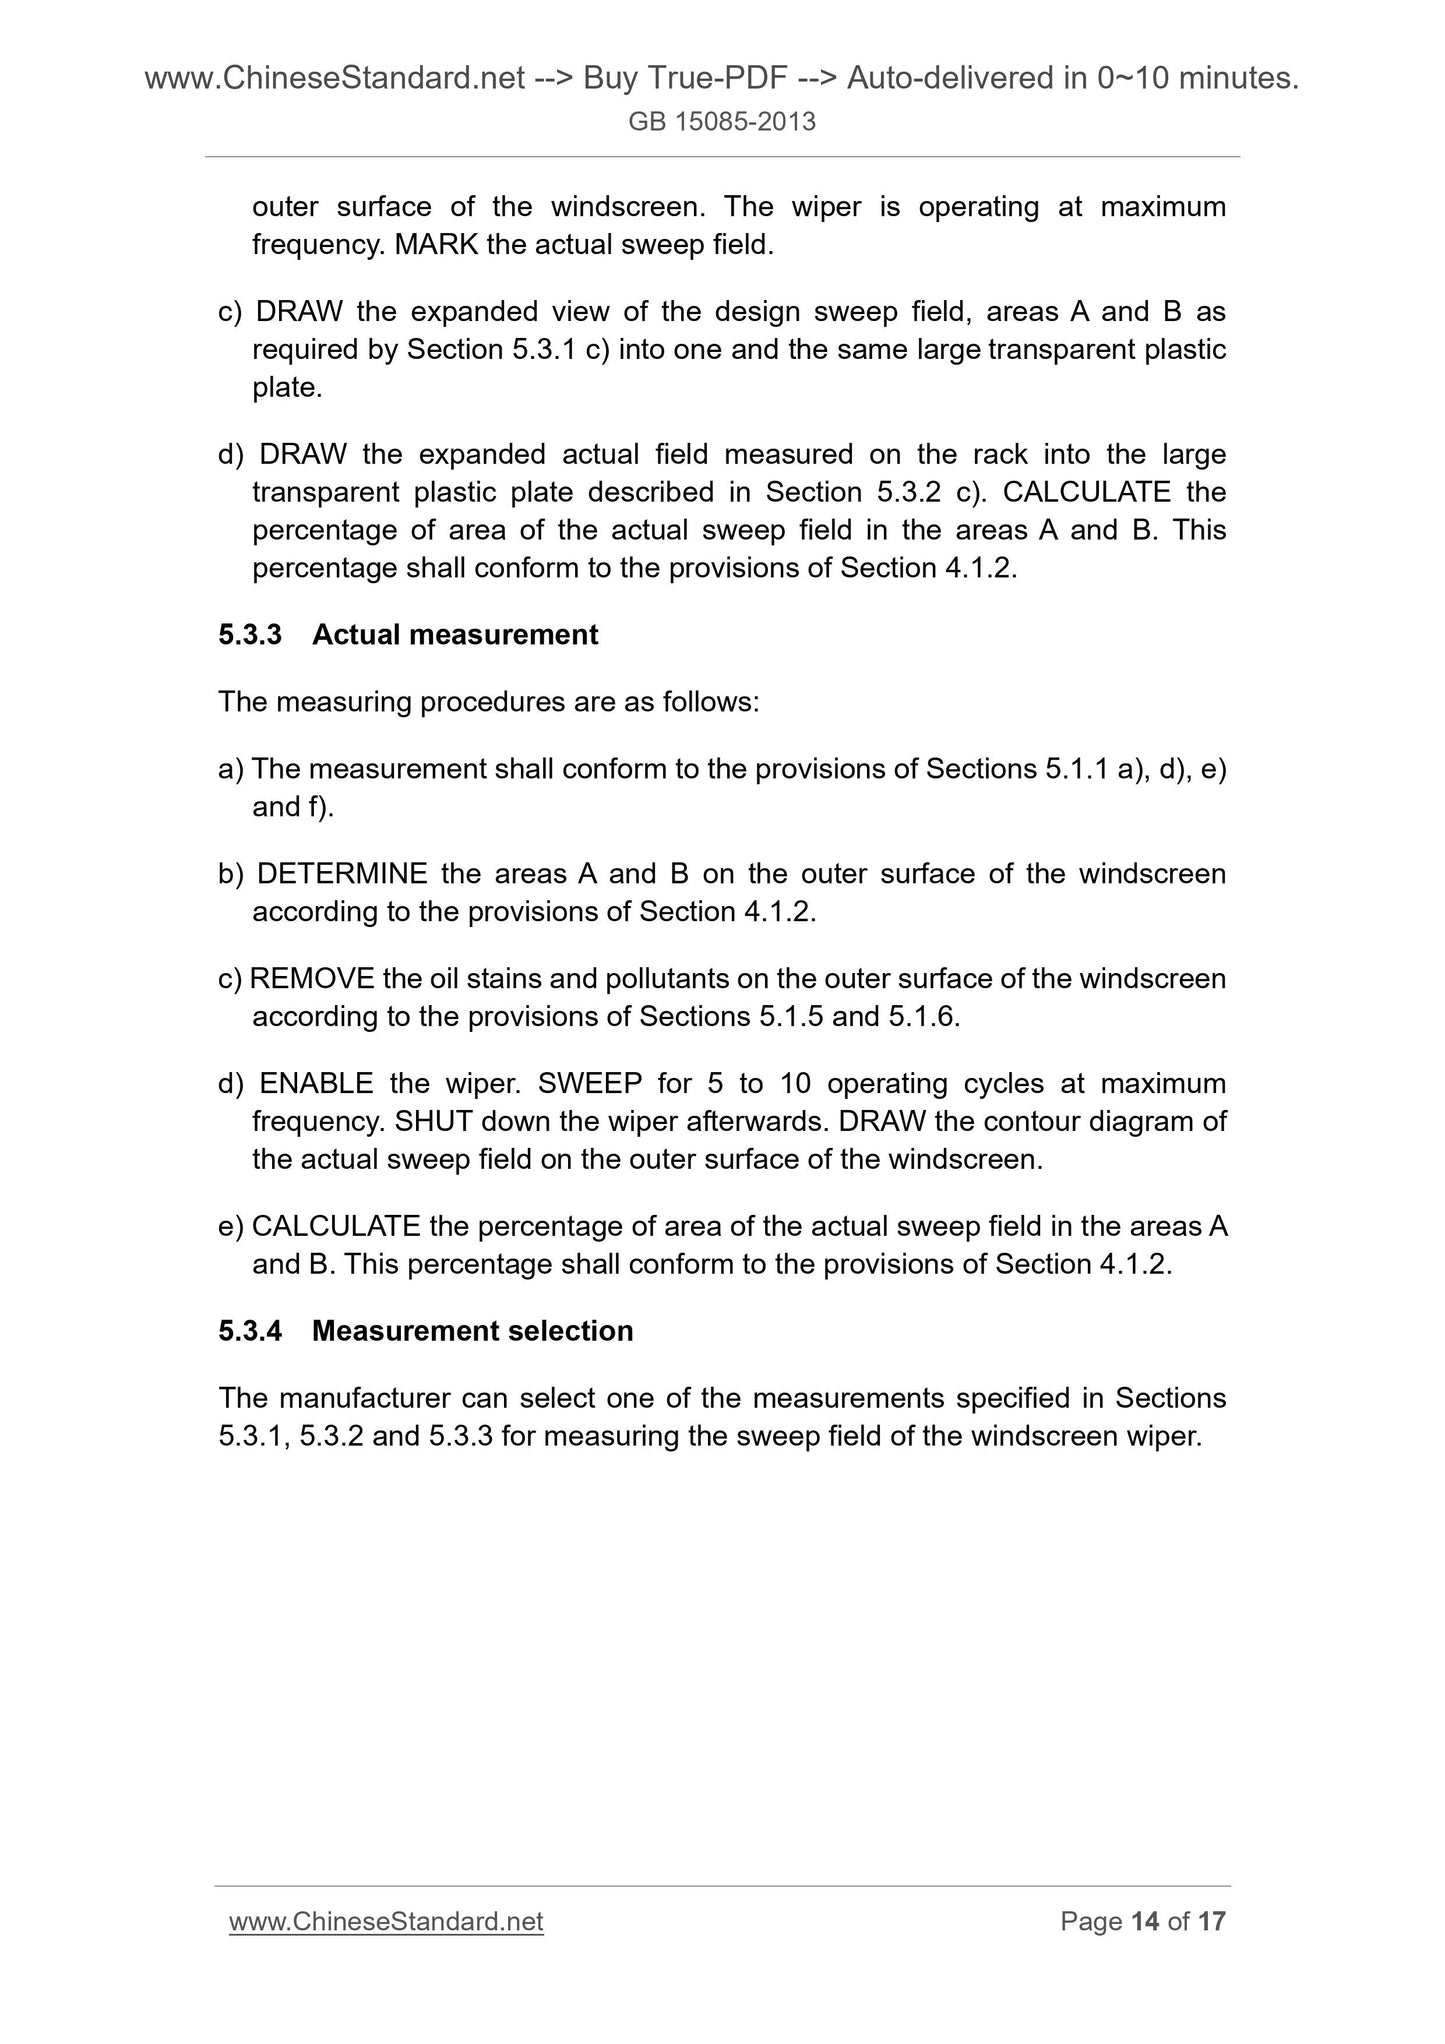 GB 15085-2013 Page 8